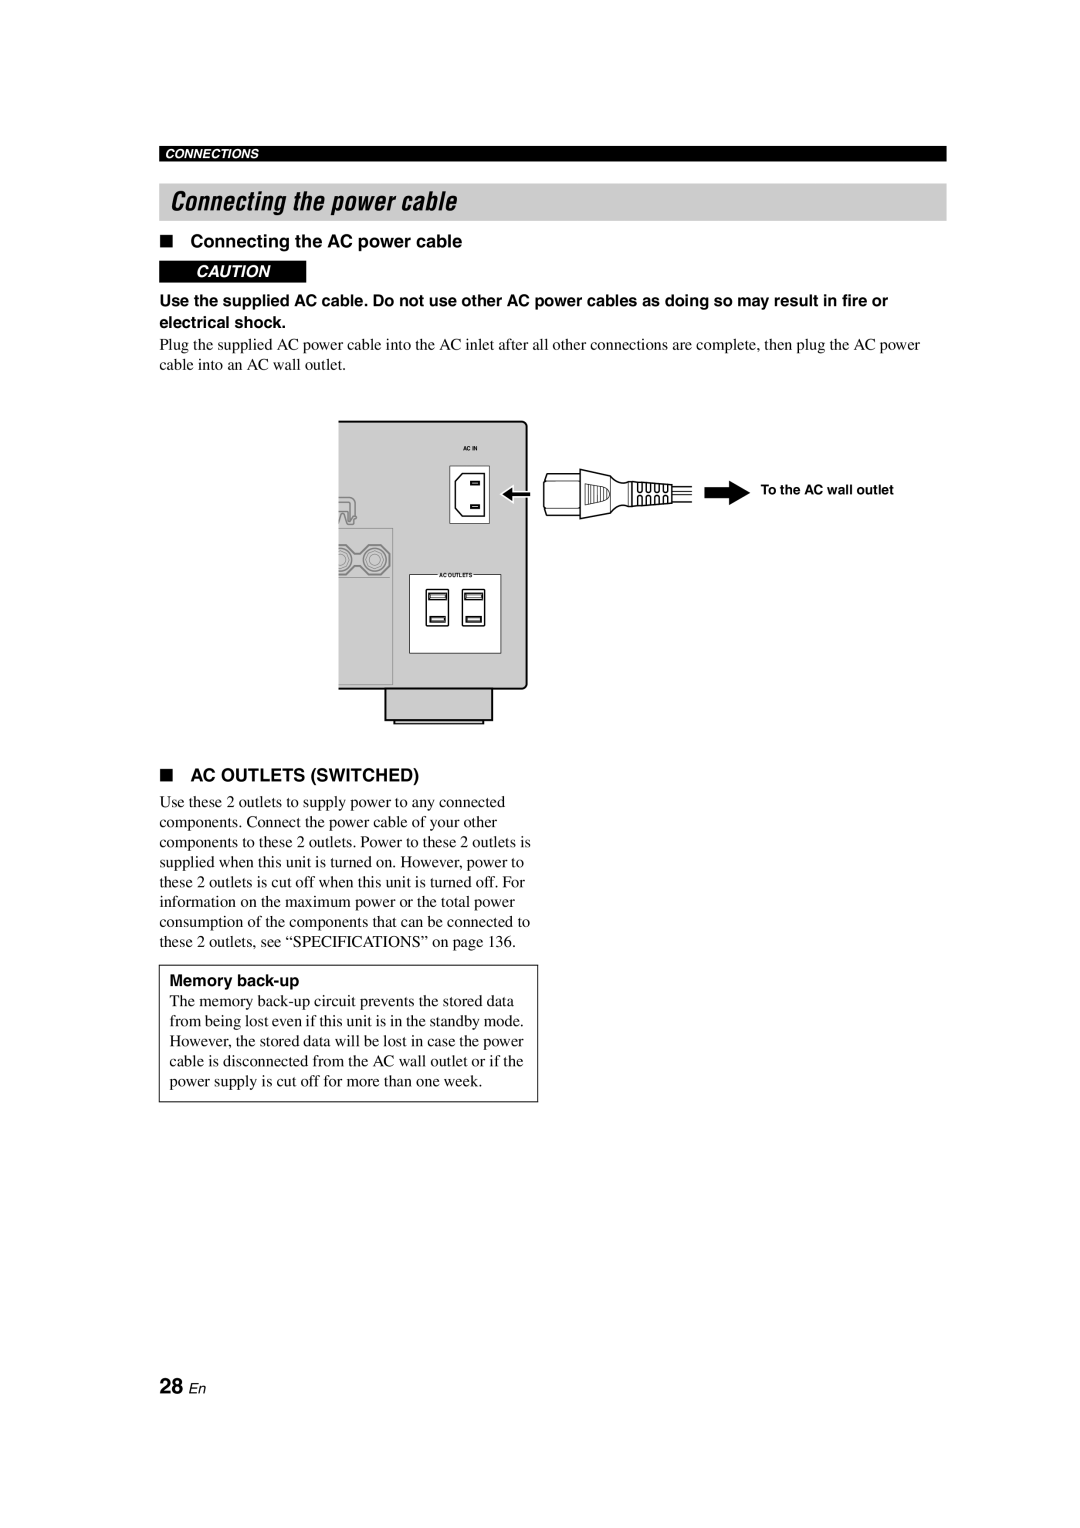 Yamaha HTR-6090 owner manual Connecting the power cable, 28 En, Connecting the AC power cable, Ac Outlets Switched 